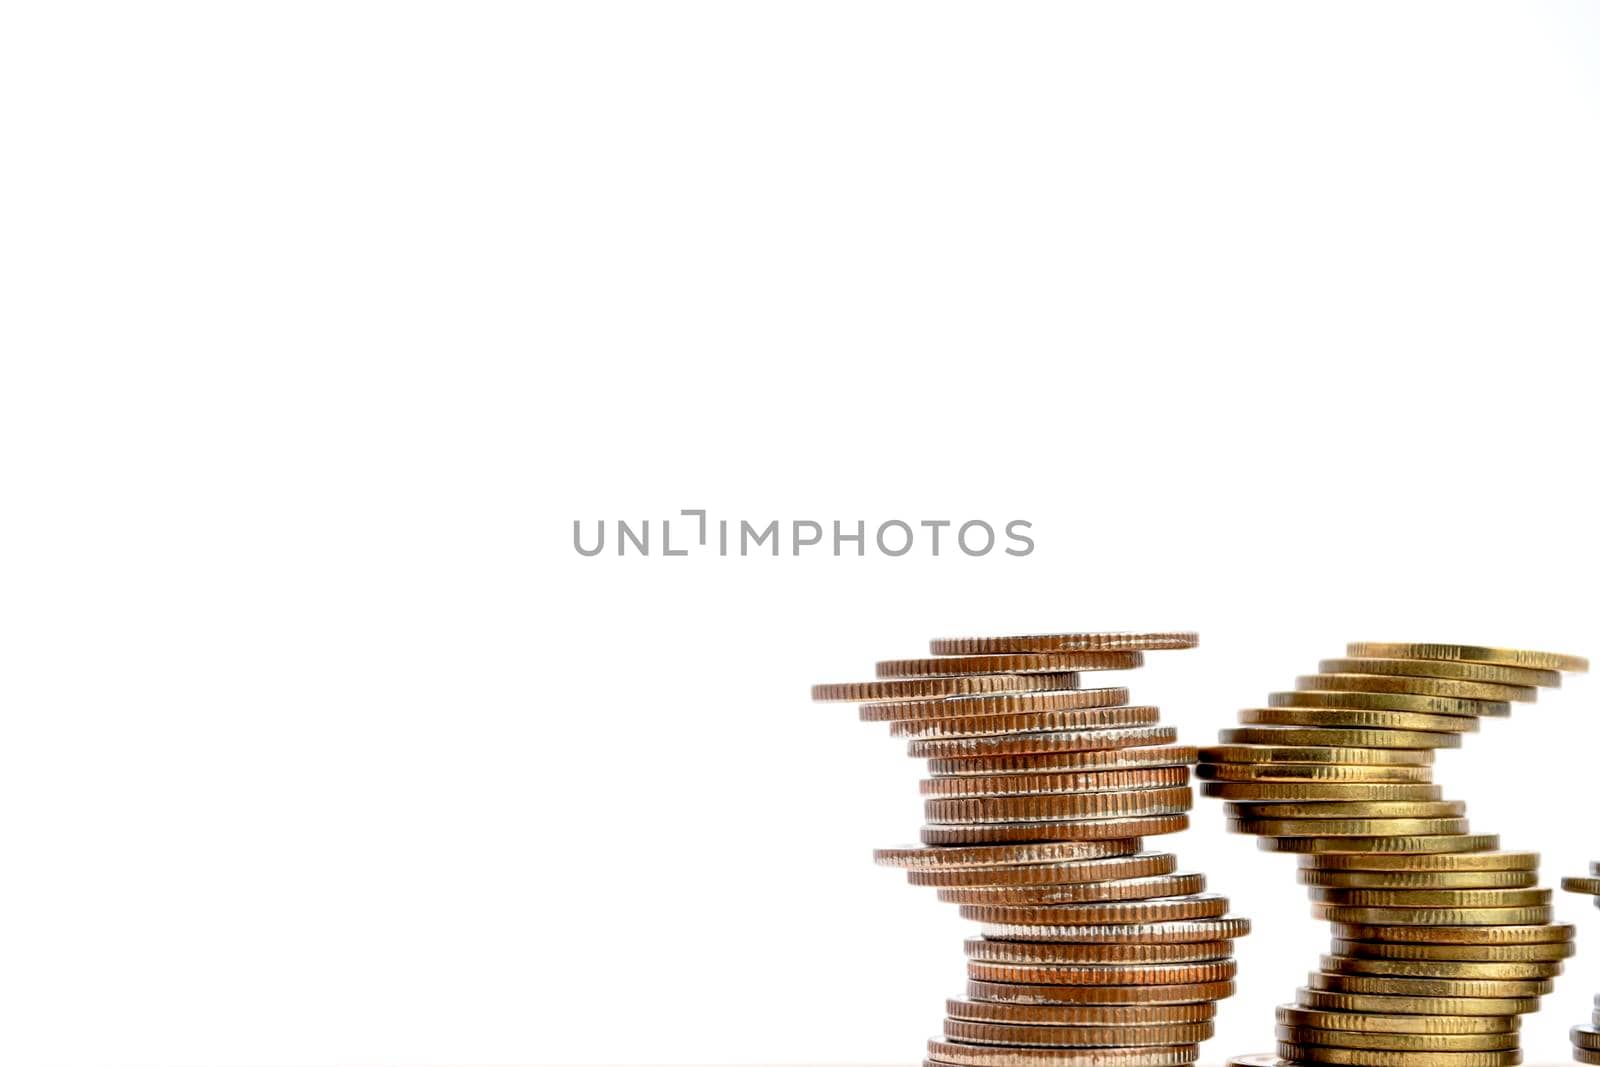 Stack of coins isolated on white background, with copy space, use for business and finance concepts.